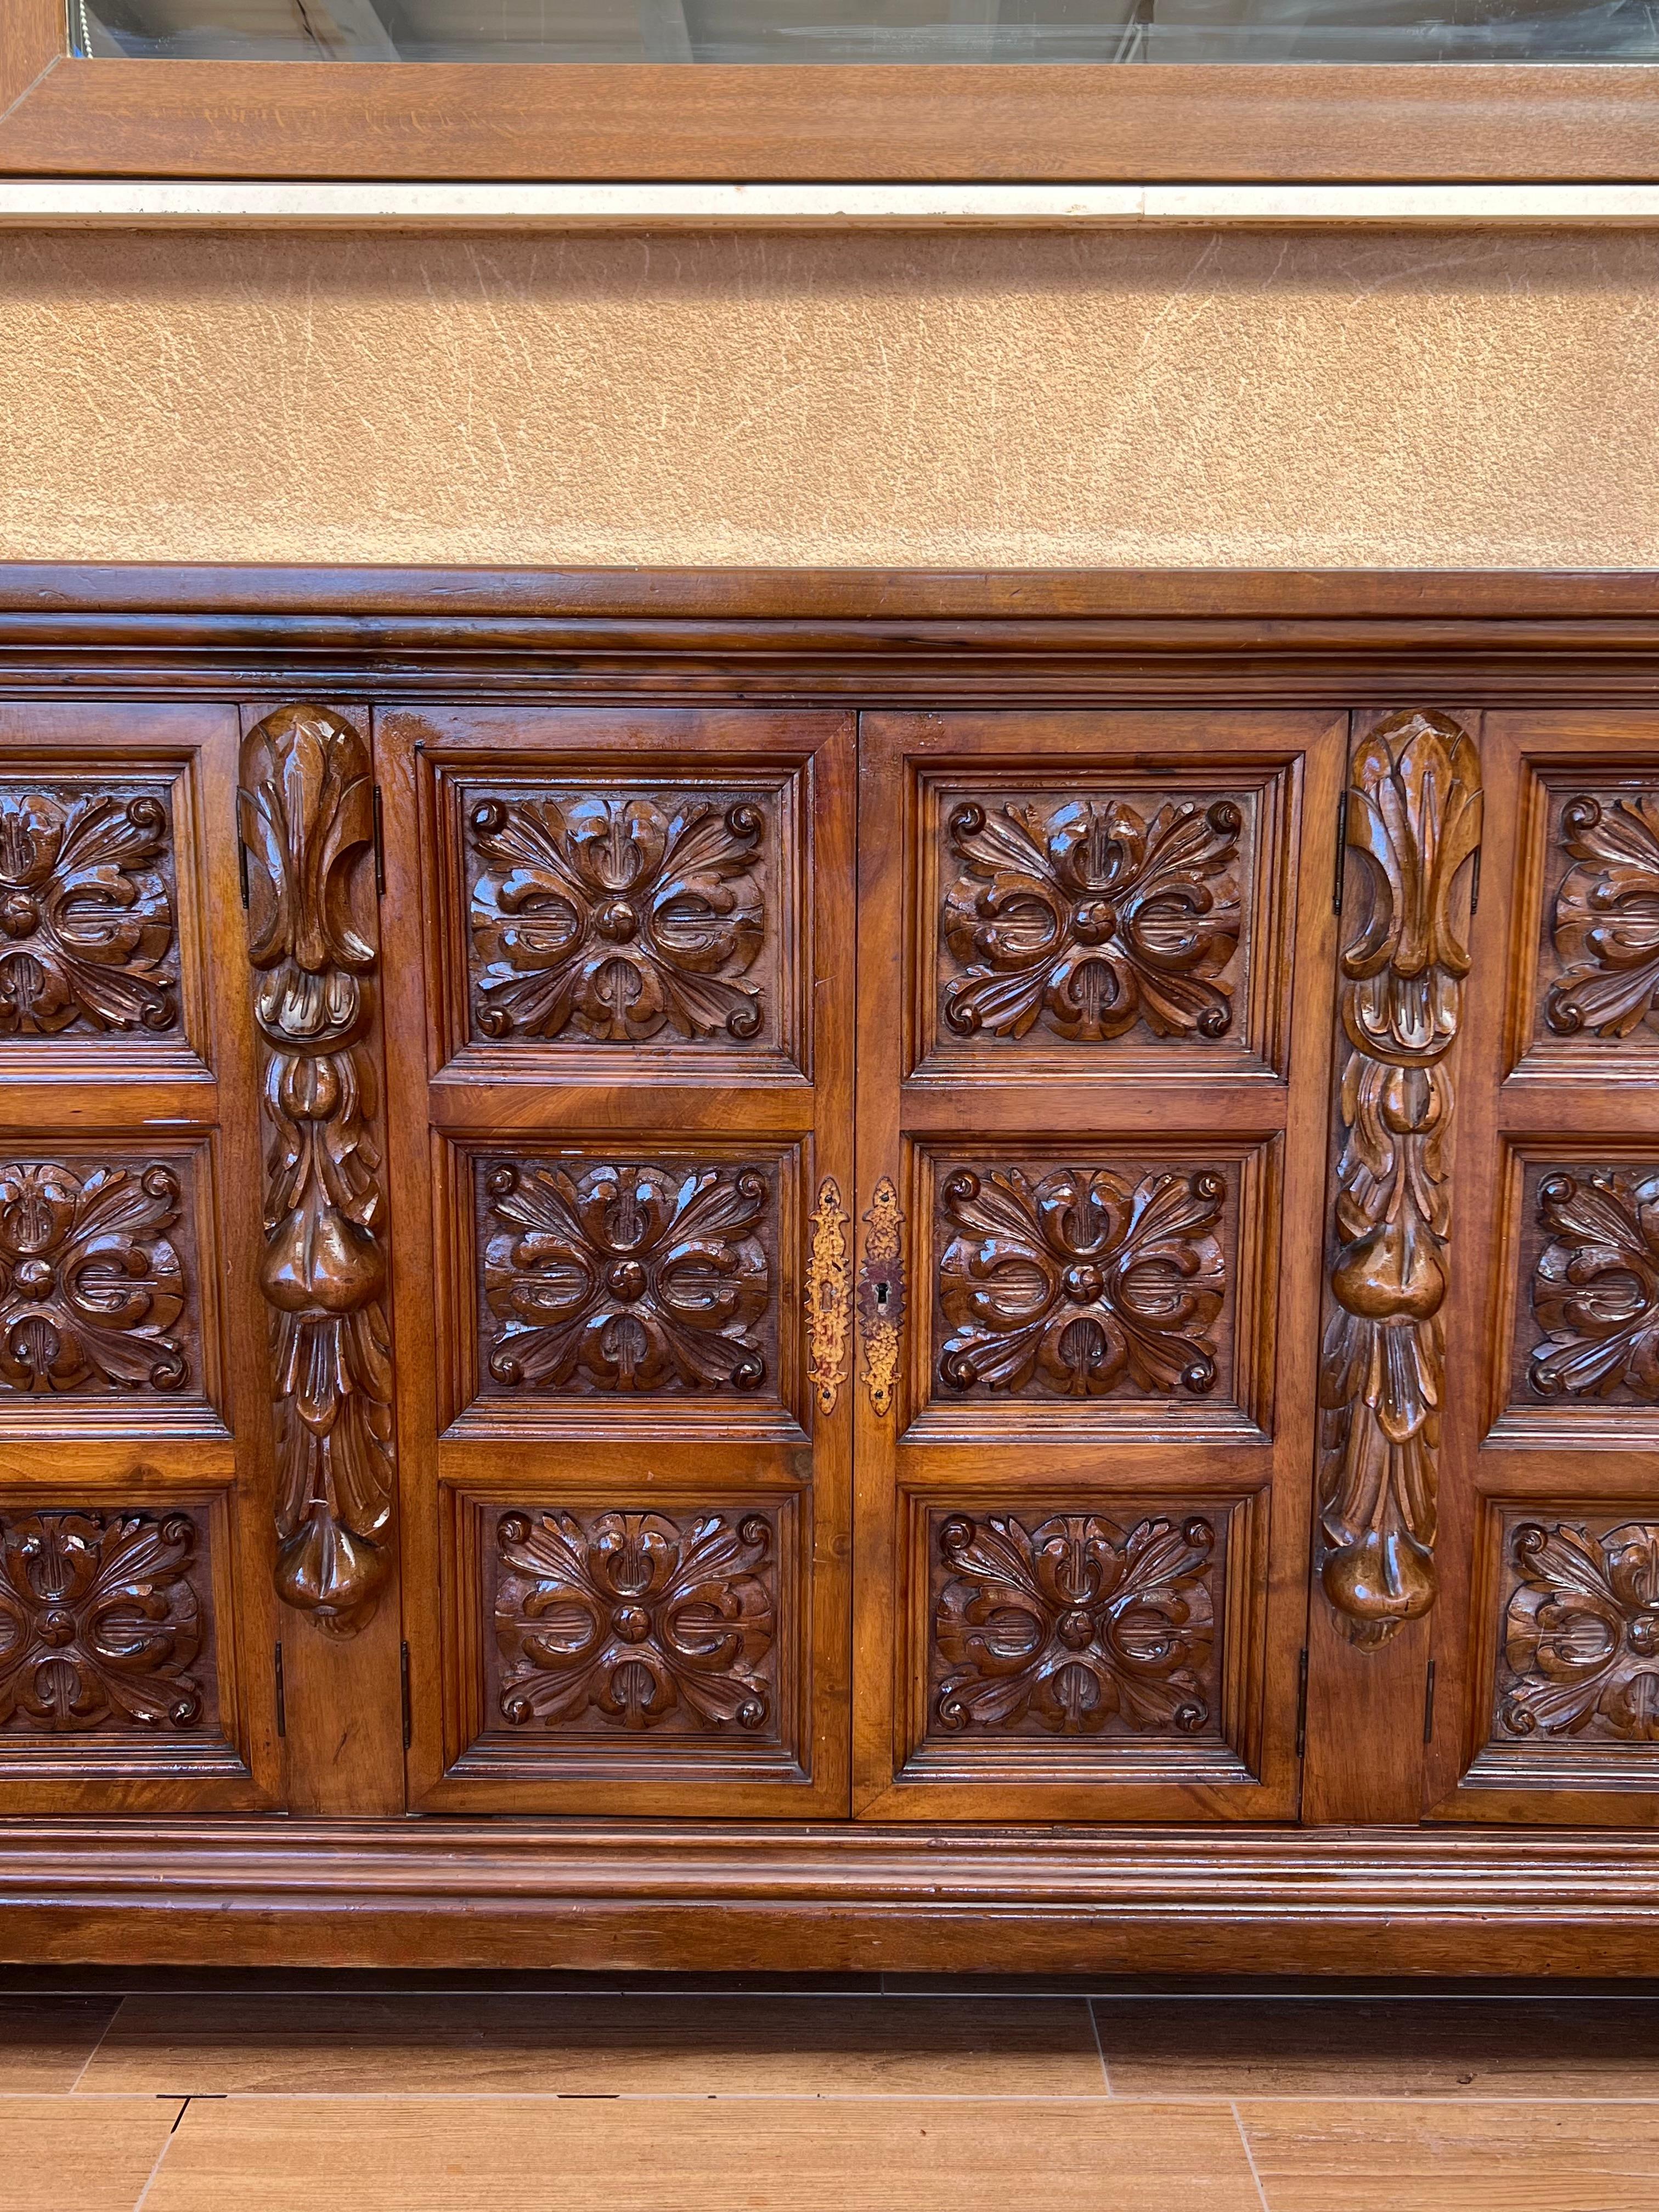 Antique Spanish Carved Walnut Sideboard with Florals Reliefs, circa 1870-1880 For Sale 3